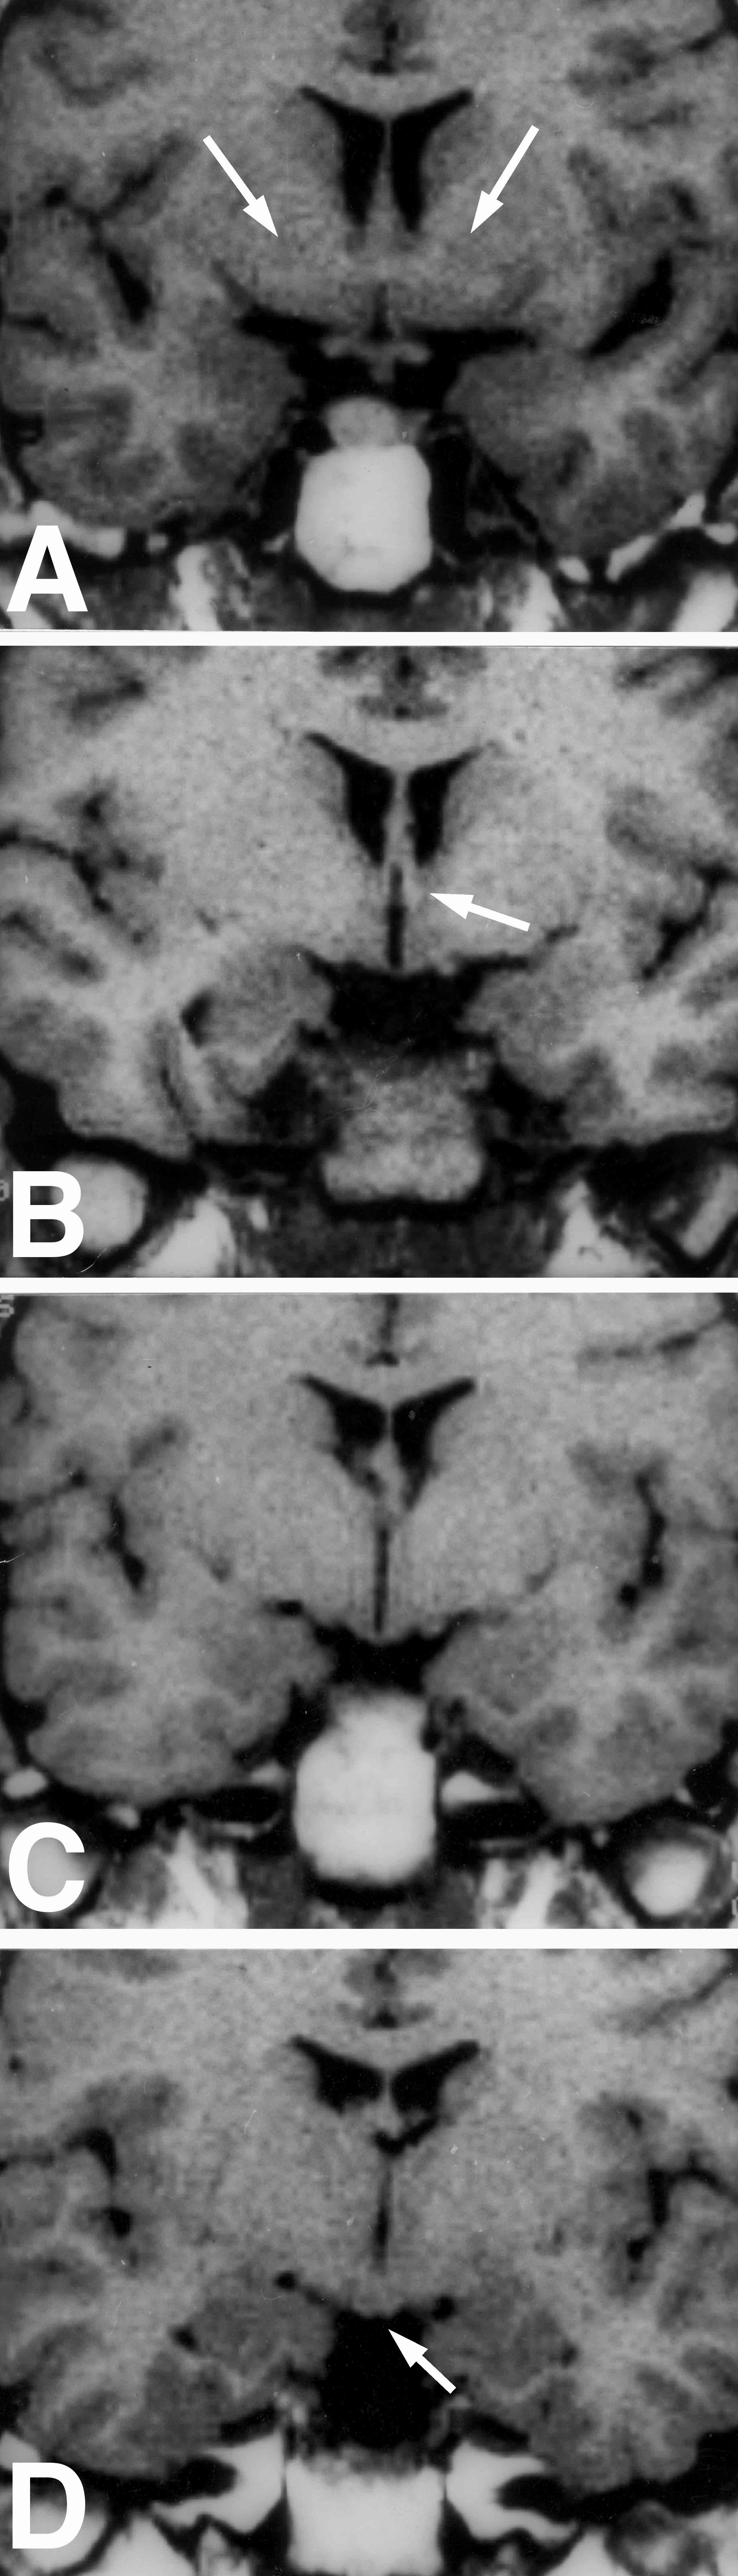 Fig. 27. MRI of coronal sections through the hypothalamus. (A) Anterior hypothalamus corresponding to Fig. 17A showing location of the anterior commissure (arrows). (B) Mid hypothalamus corresponding to Fig. 17B showing location of the fornix (arrow). (C) Mid hypothalamus corresponding to Fig. 17C showing the optic tract. The fornix can sometimes also be visualized at this level. (D) Caudal hypothalamus corresponding to Fig. 17D at the level of the medial mammillary bodies (arrow). Sometimes the mammilothalamic tract can be visualized at this level.